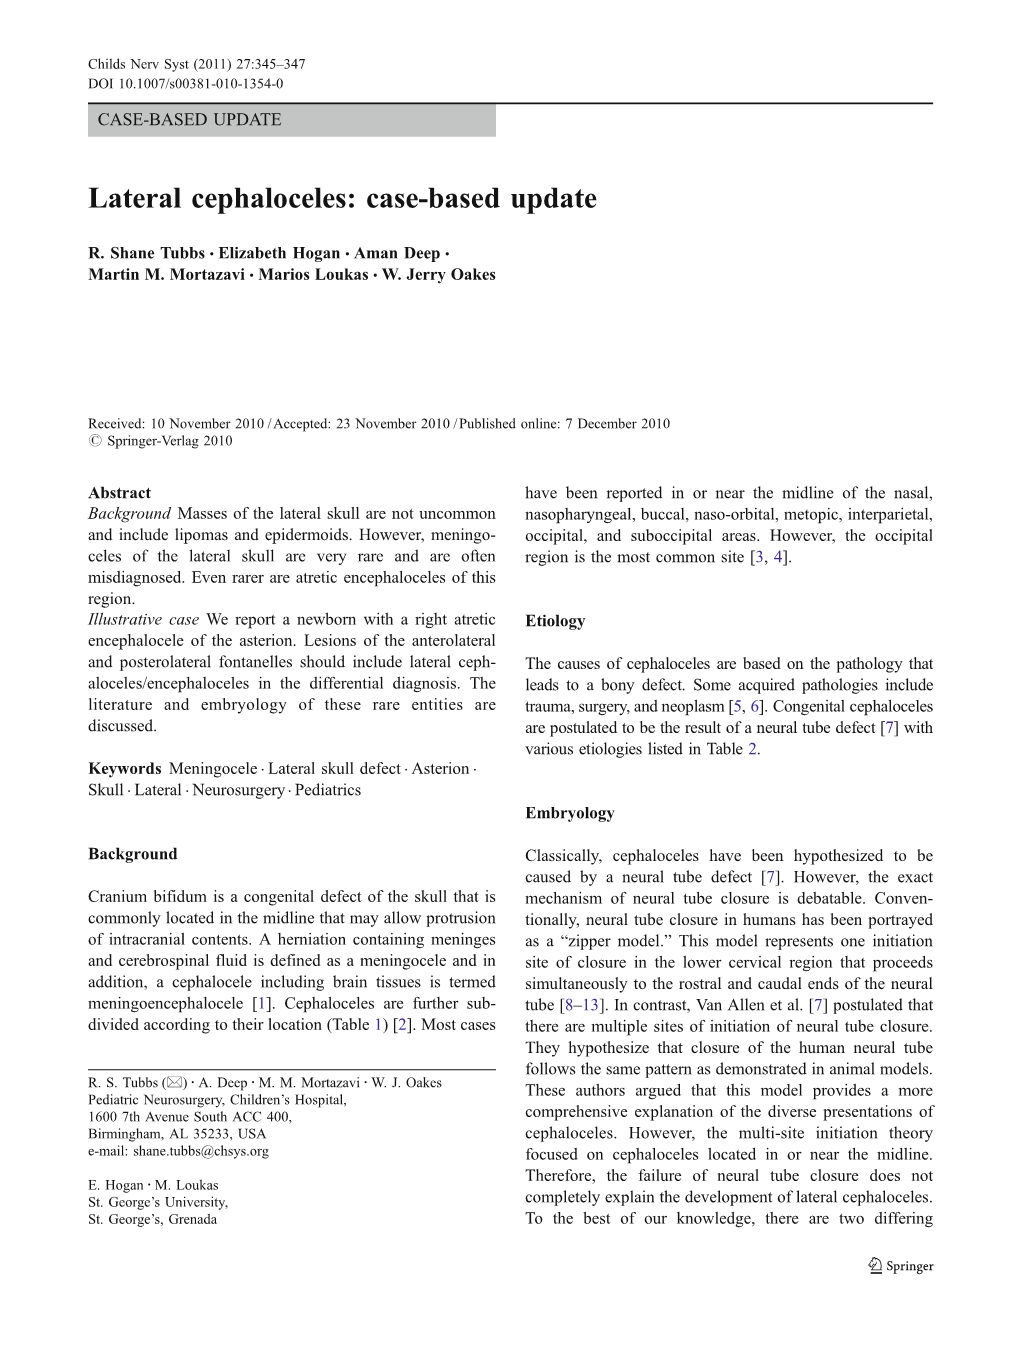 Lateral Cephaloceles: Case-Based Update